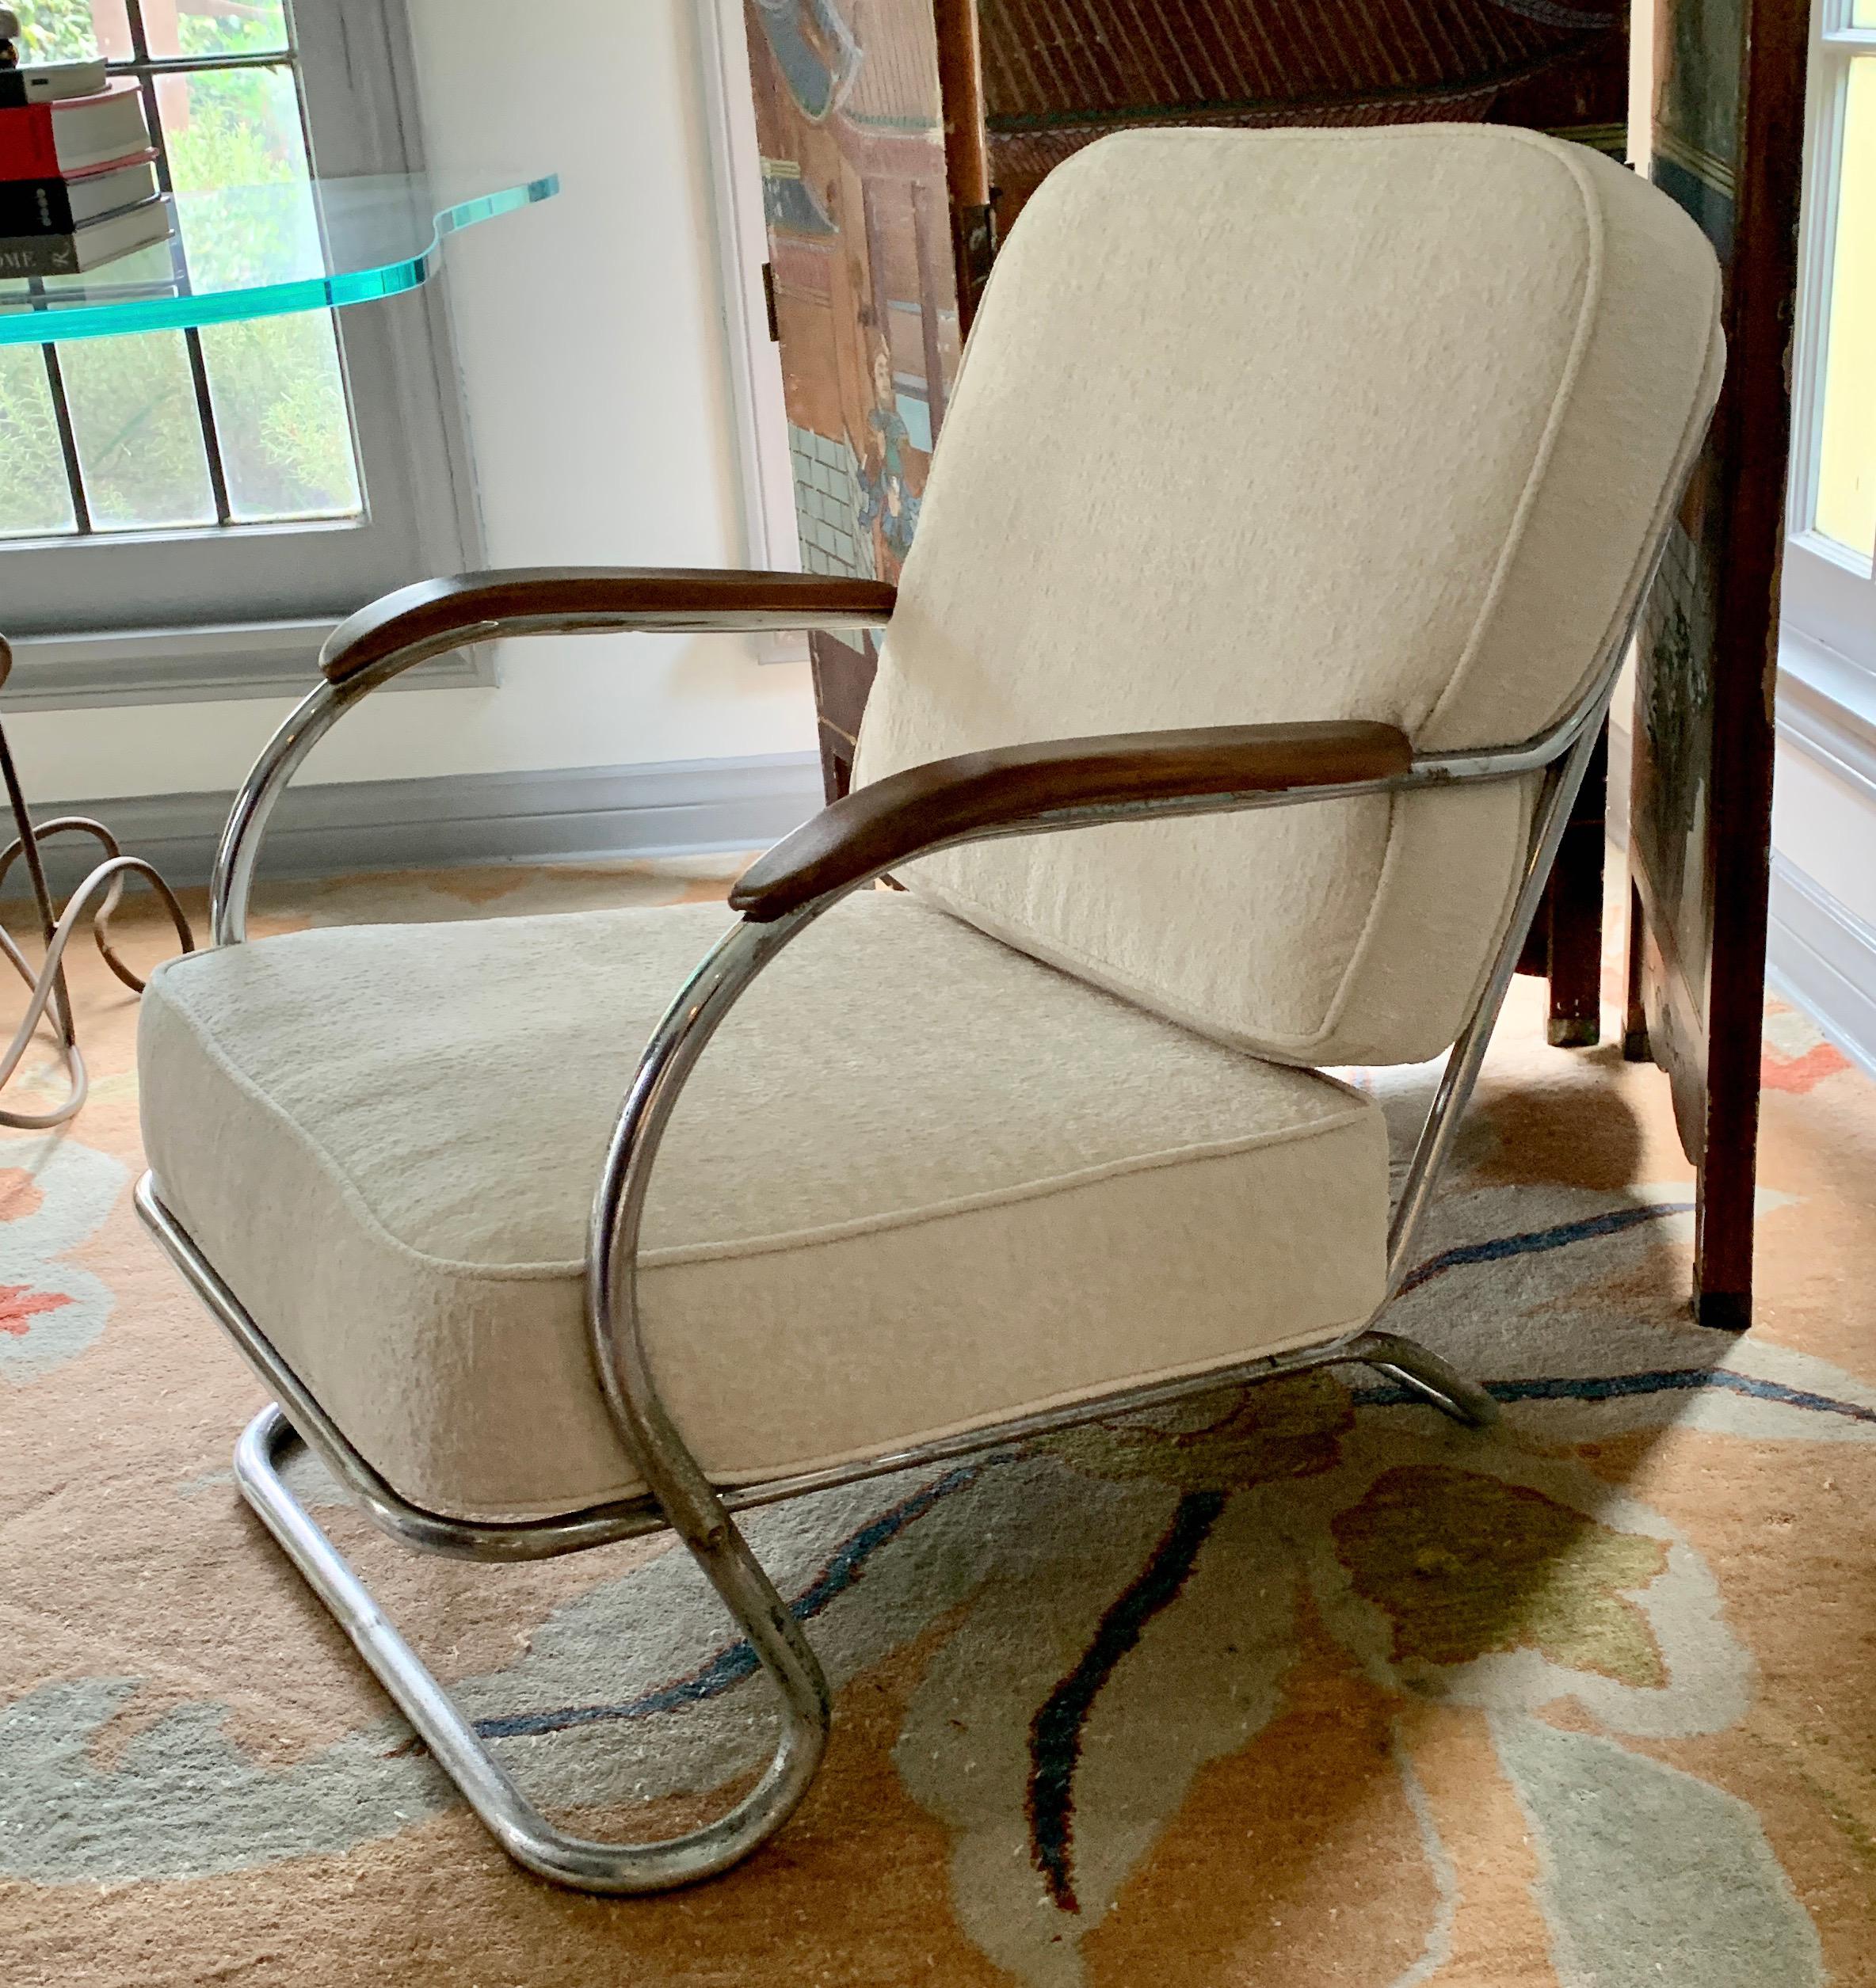 Mucke-Melder mid century tubular steel chair with wood arms the chair is newly upholstered in a white Boucle style fabric. A compliment to any den, guest room or office setting.
The chrome has been polished, and while it has no loss, it does have